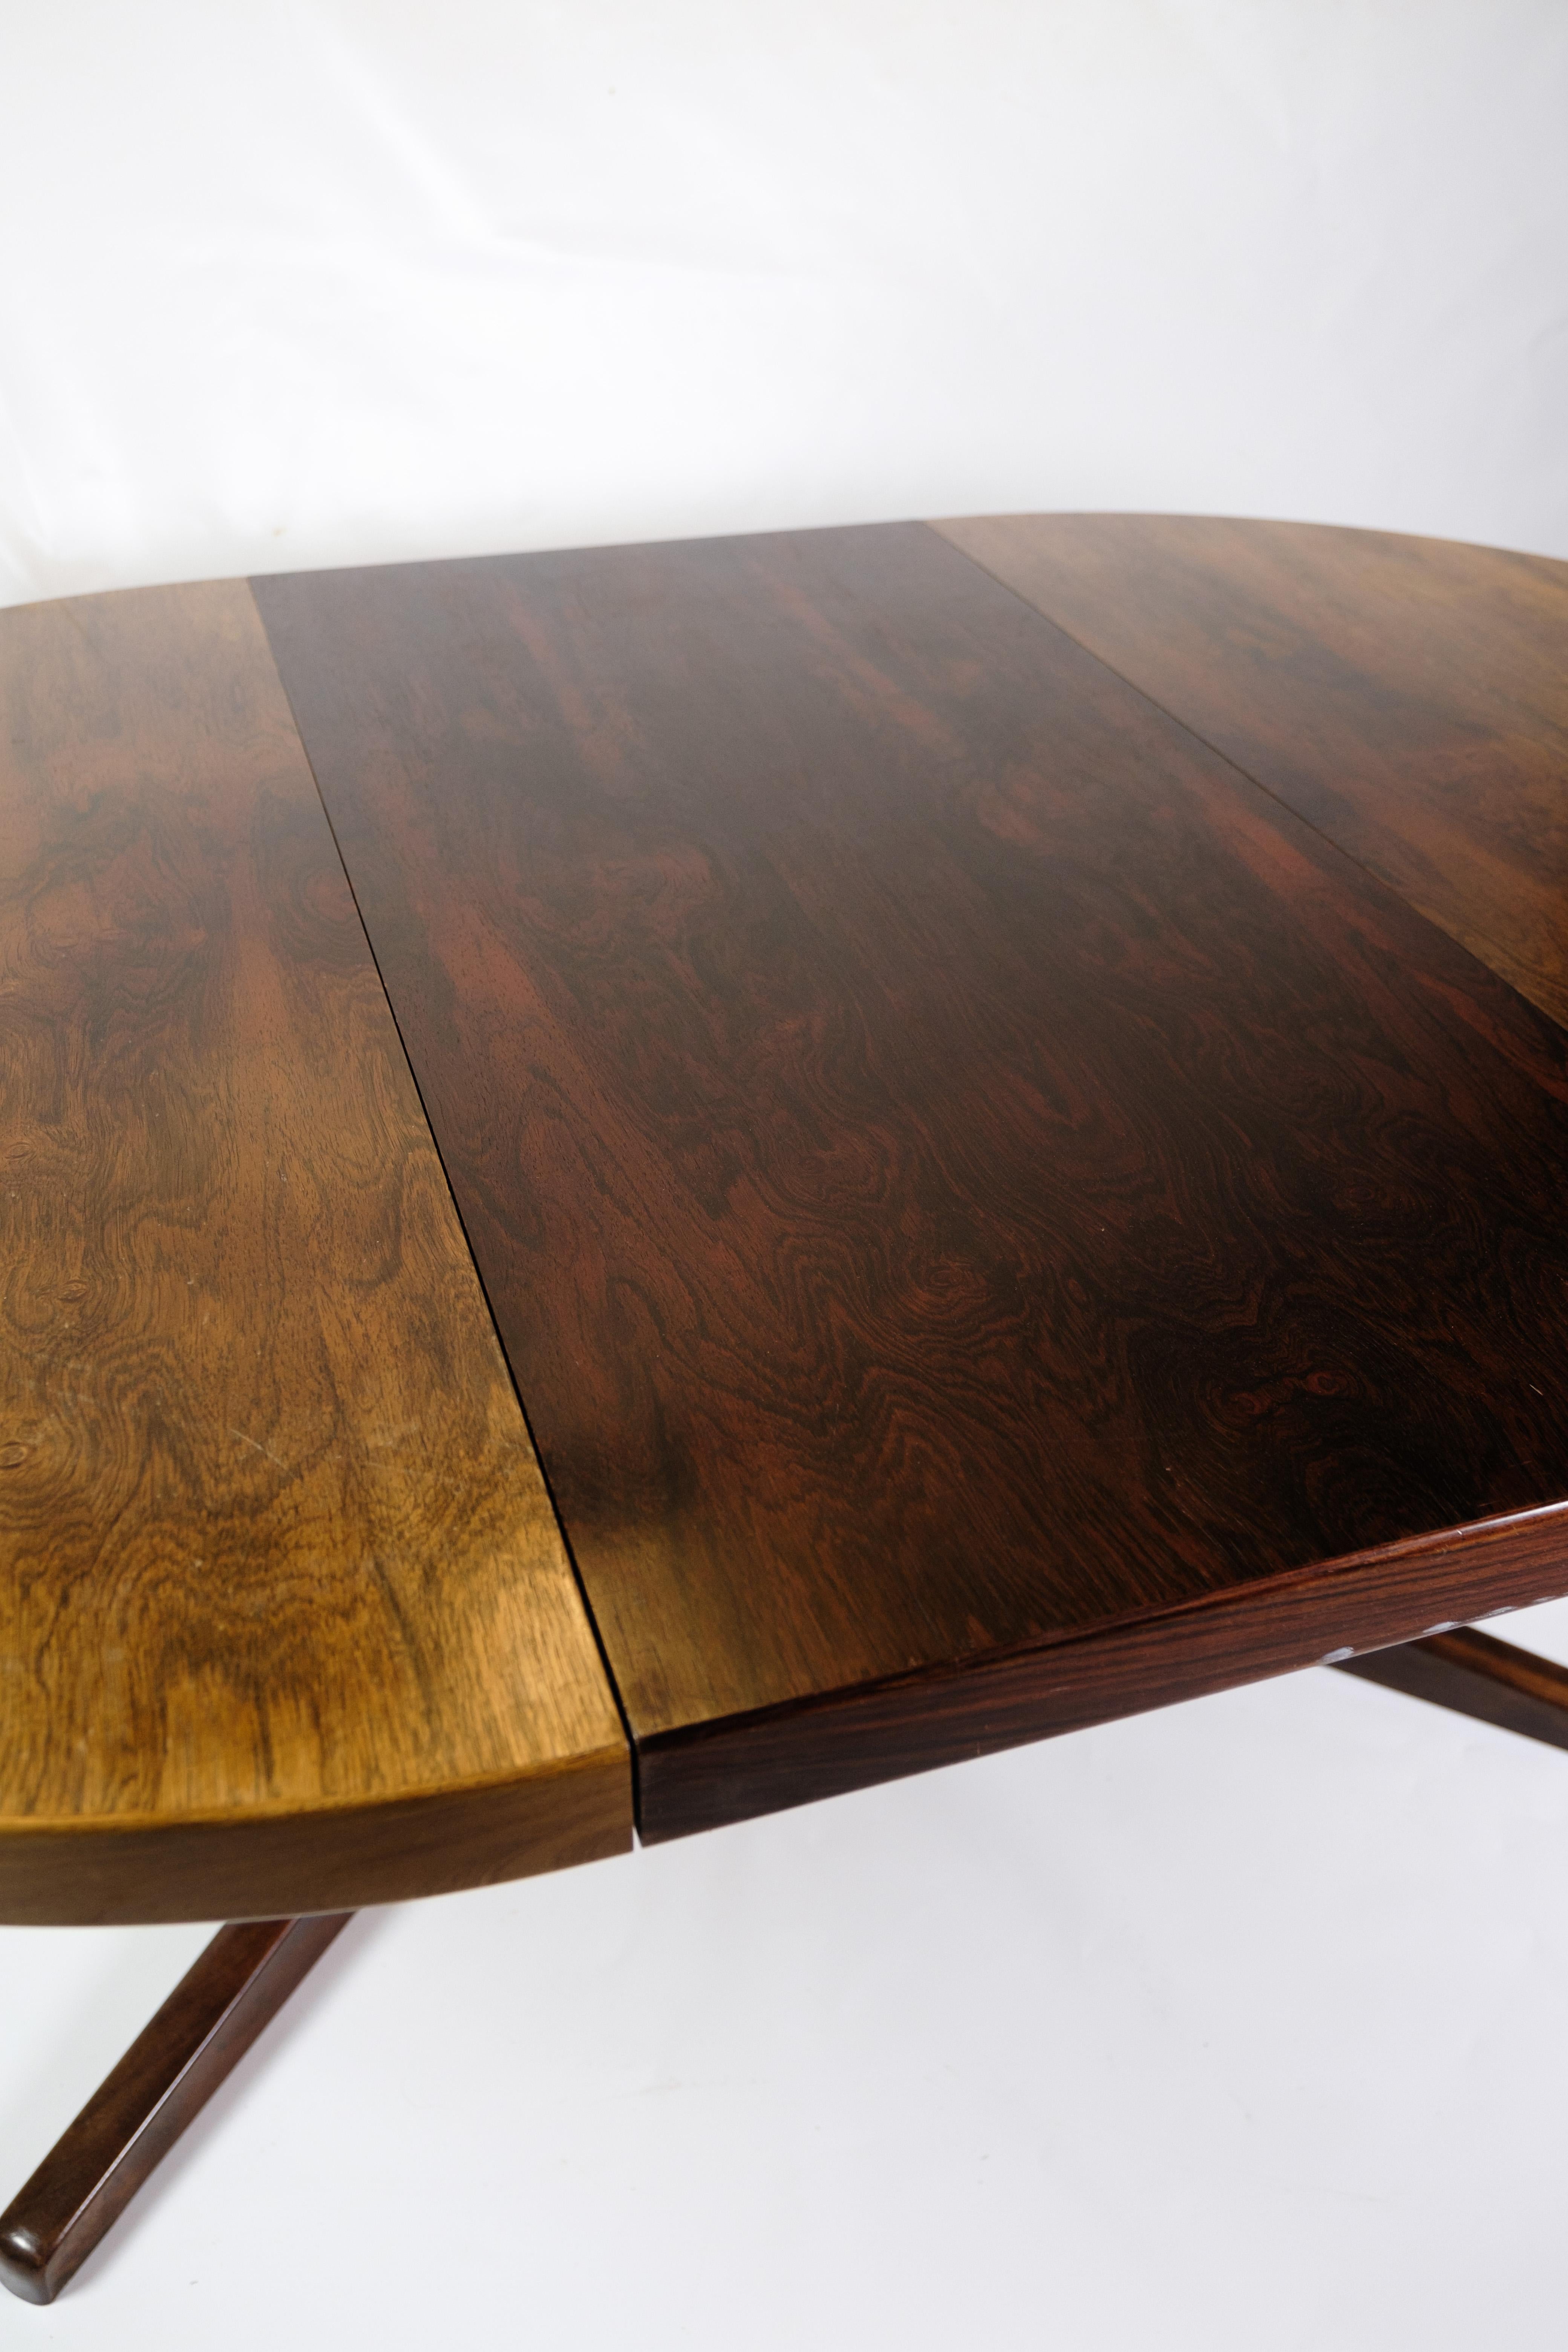 Mid-20th Century Round Dining Room Table Made In Rosewood By Skovby Møbelfabrik From 1960s For Sale